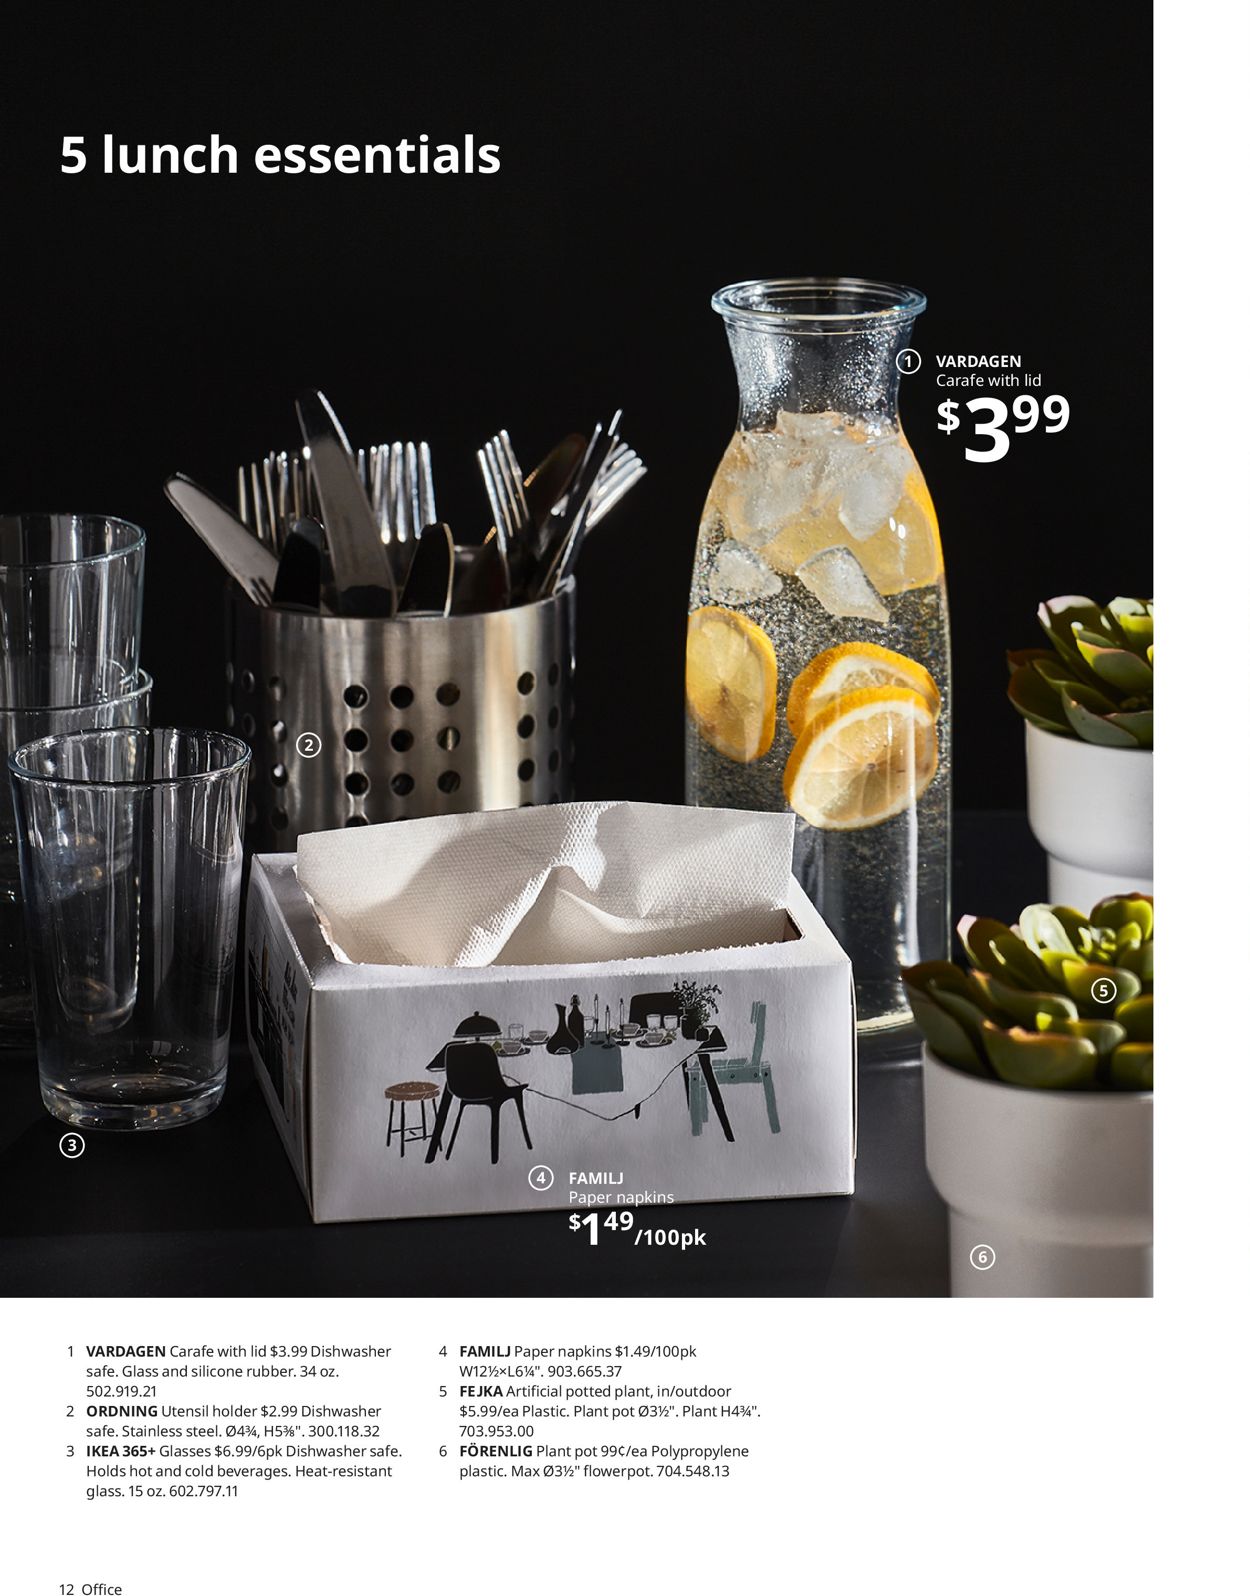 Catalogue IKEA for Business 2021 from 08/04/2020